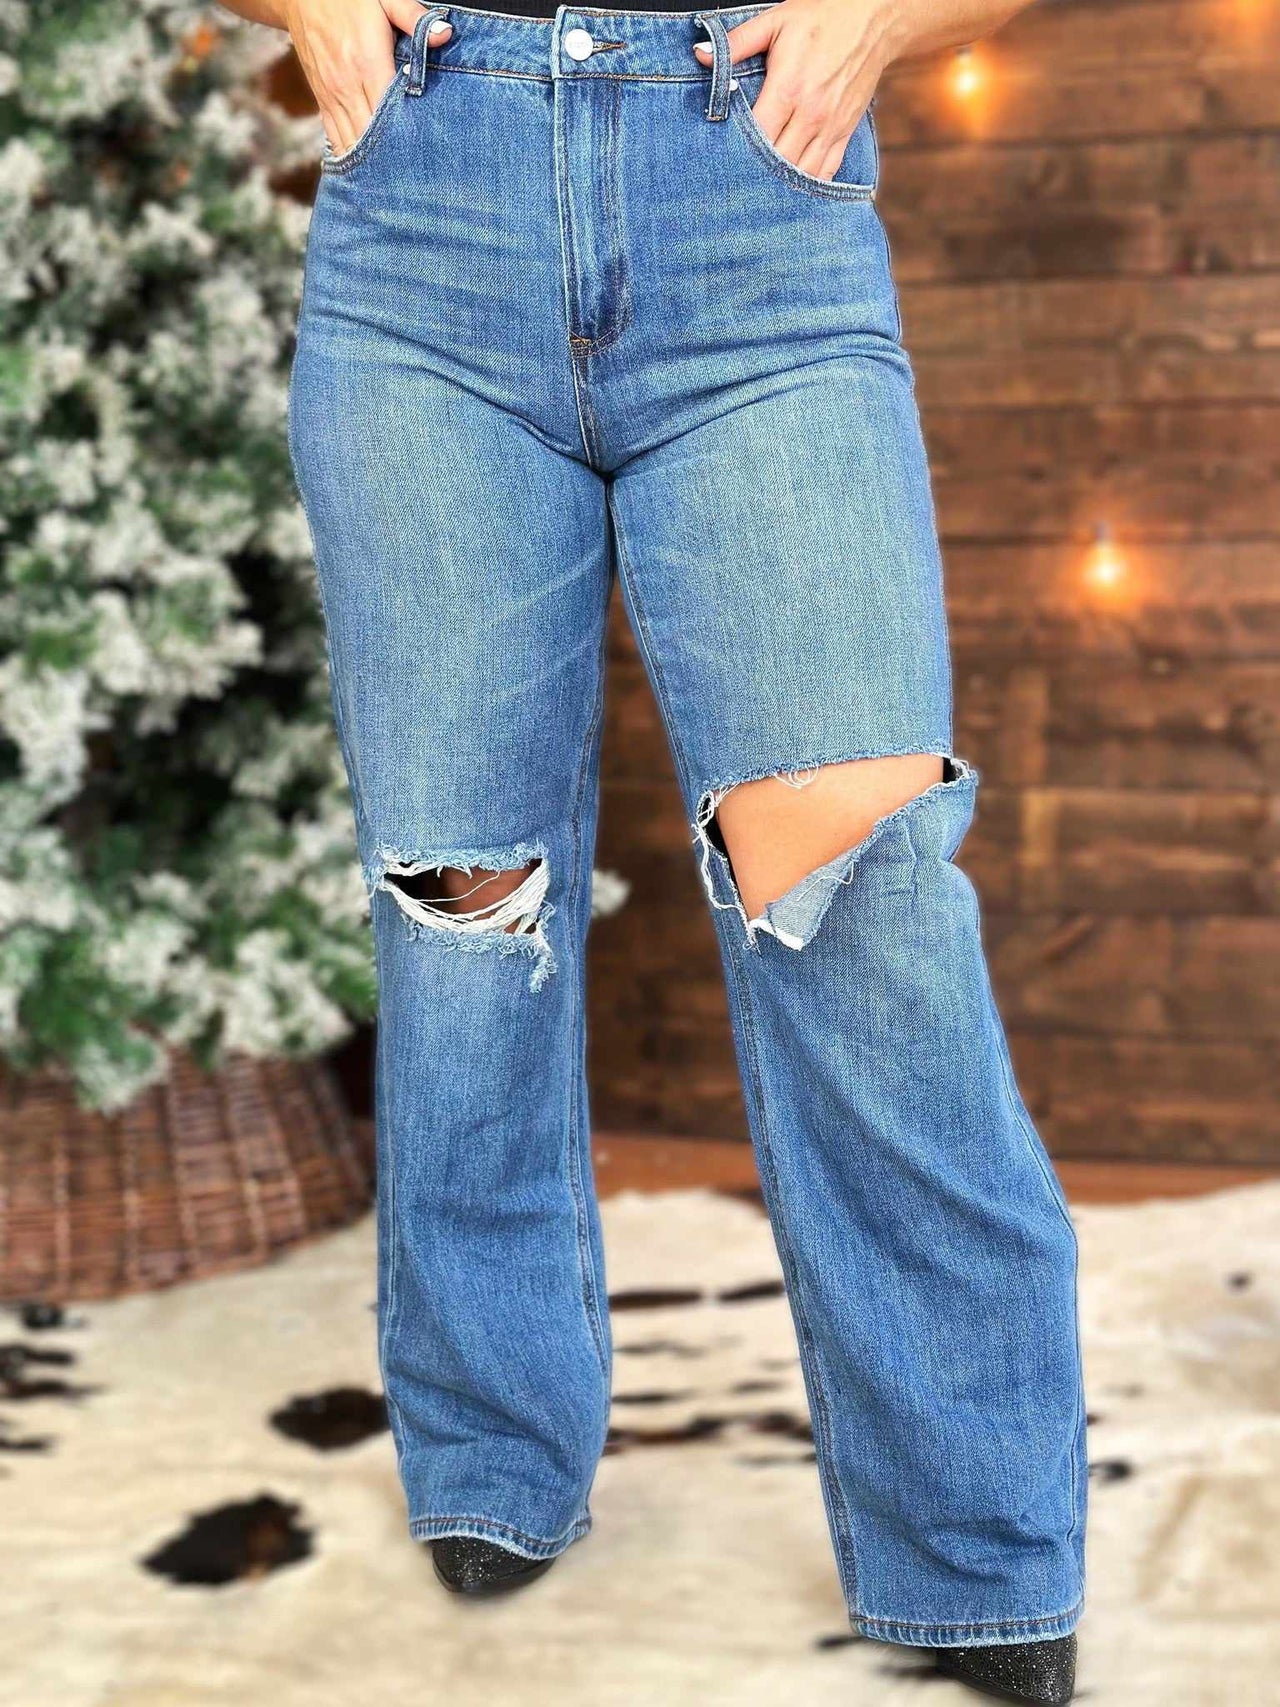 90's Comfy Jeans by Risen